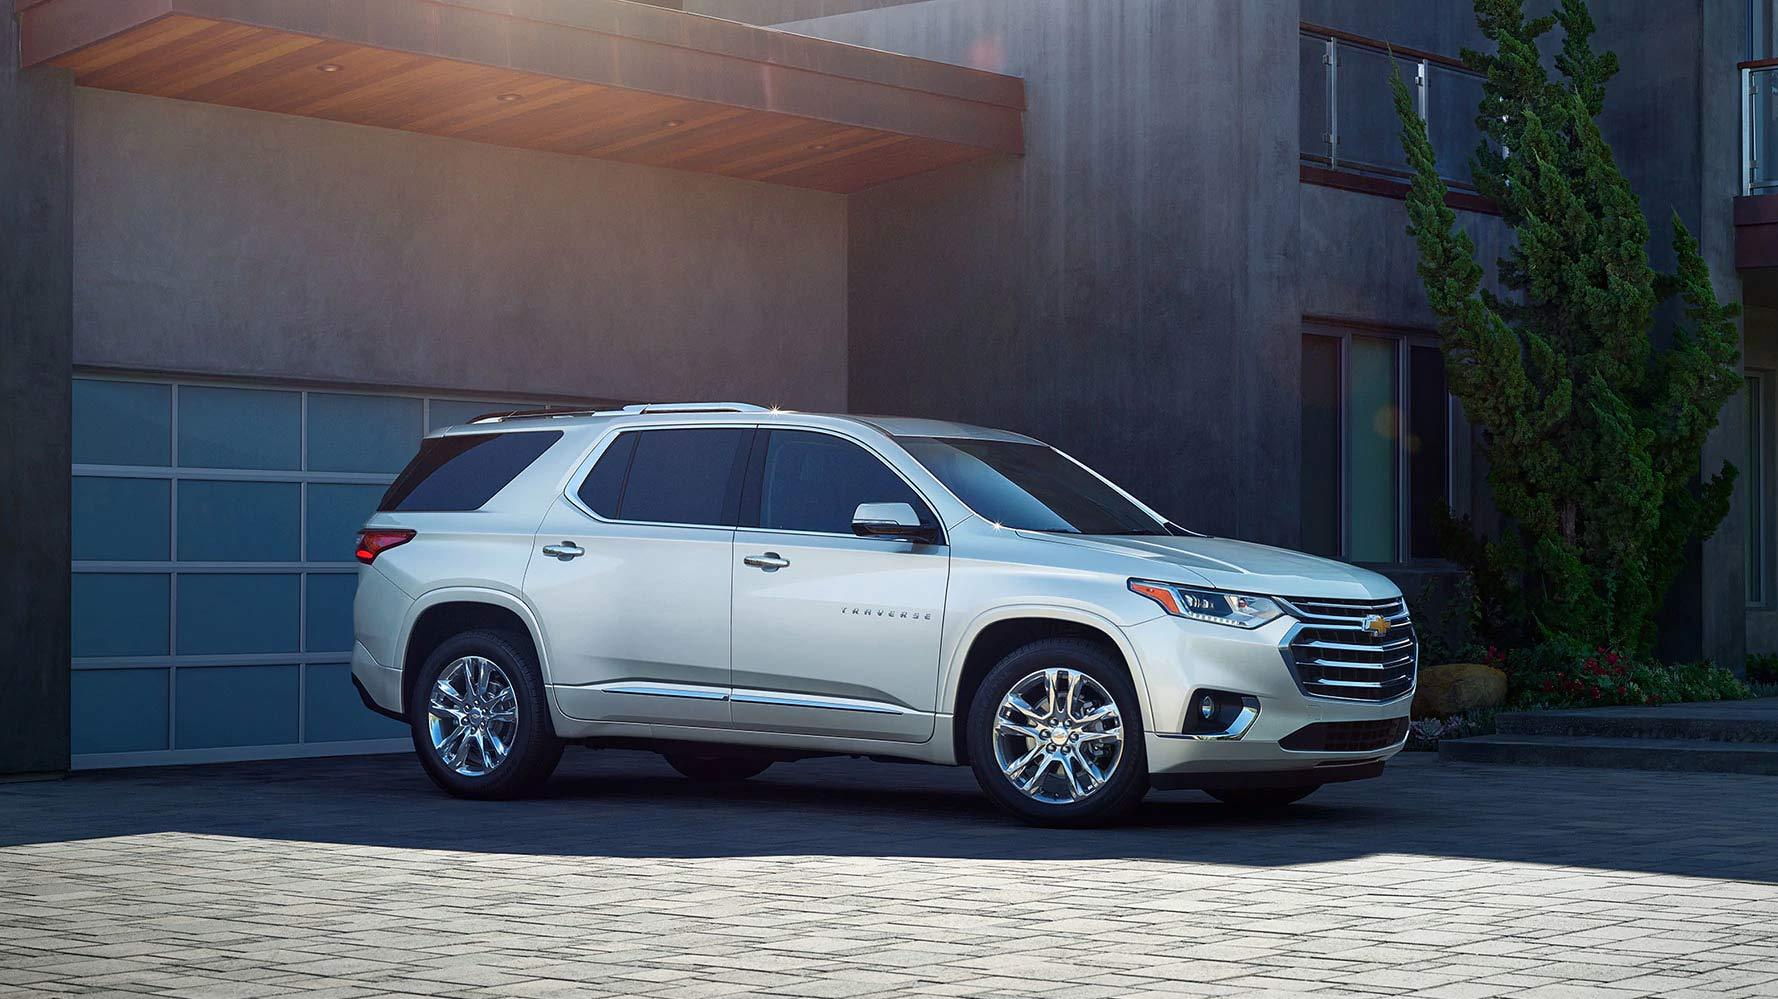 White 2019 Chevy Traverse parked in a parking